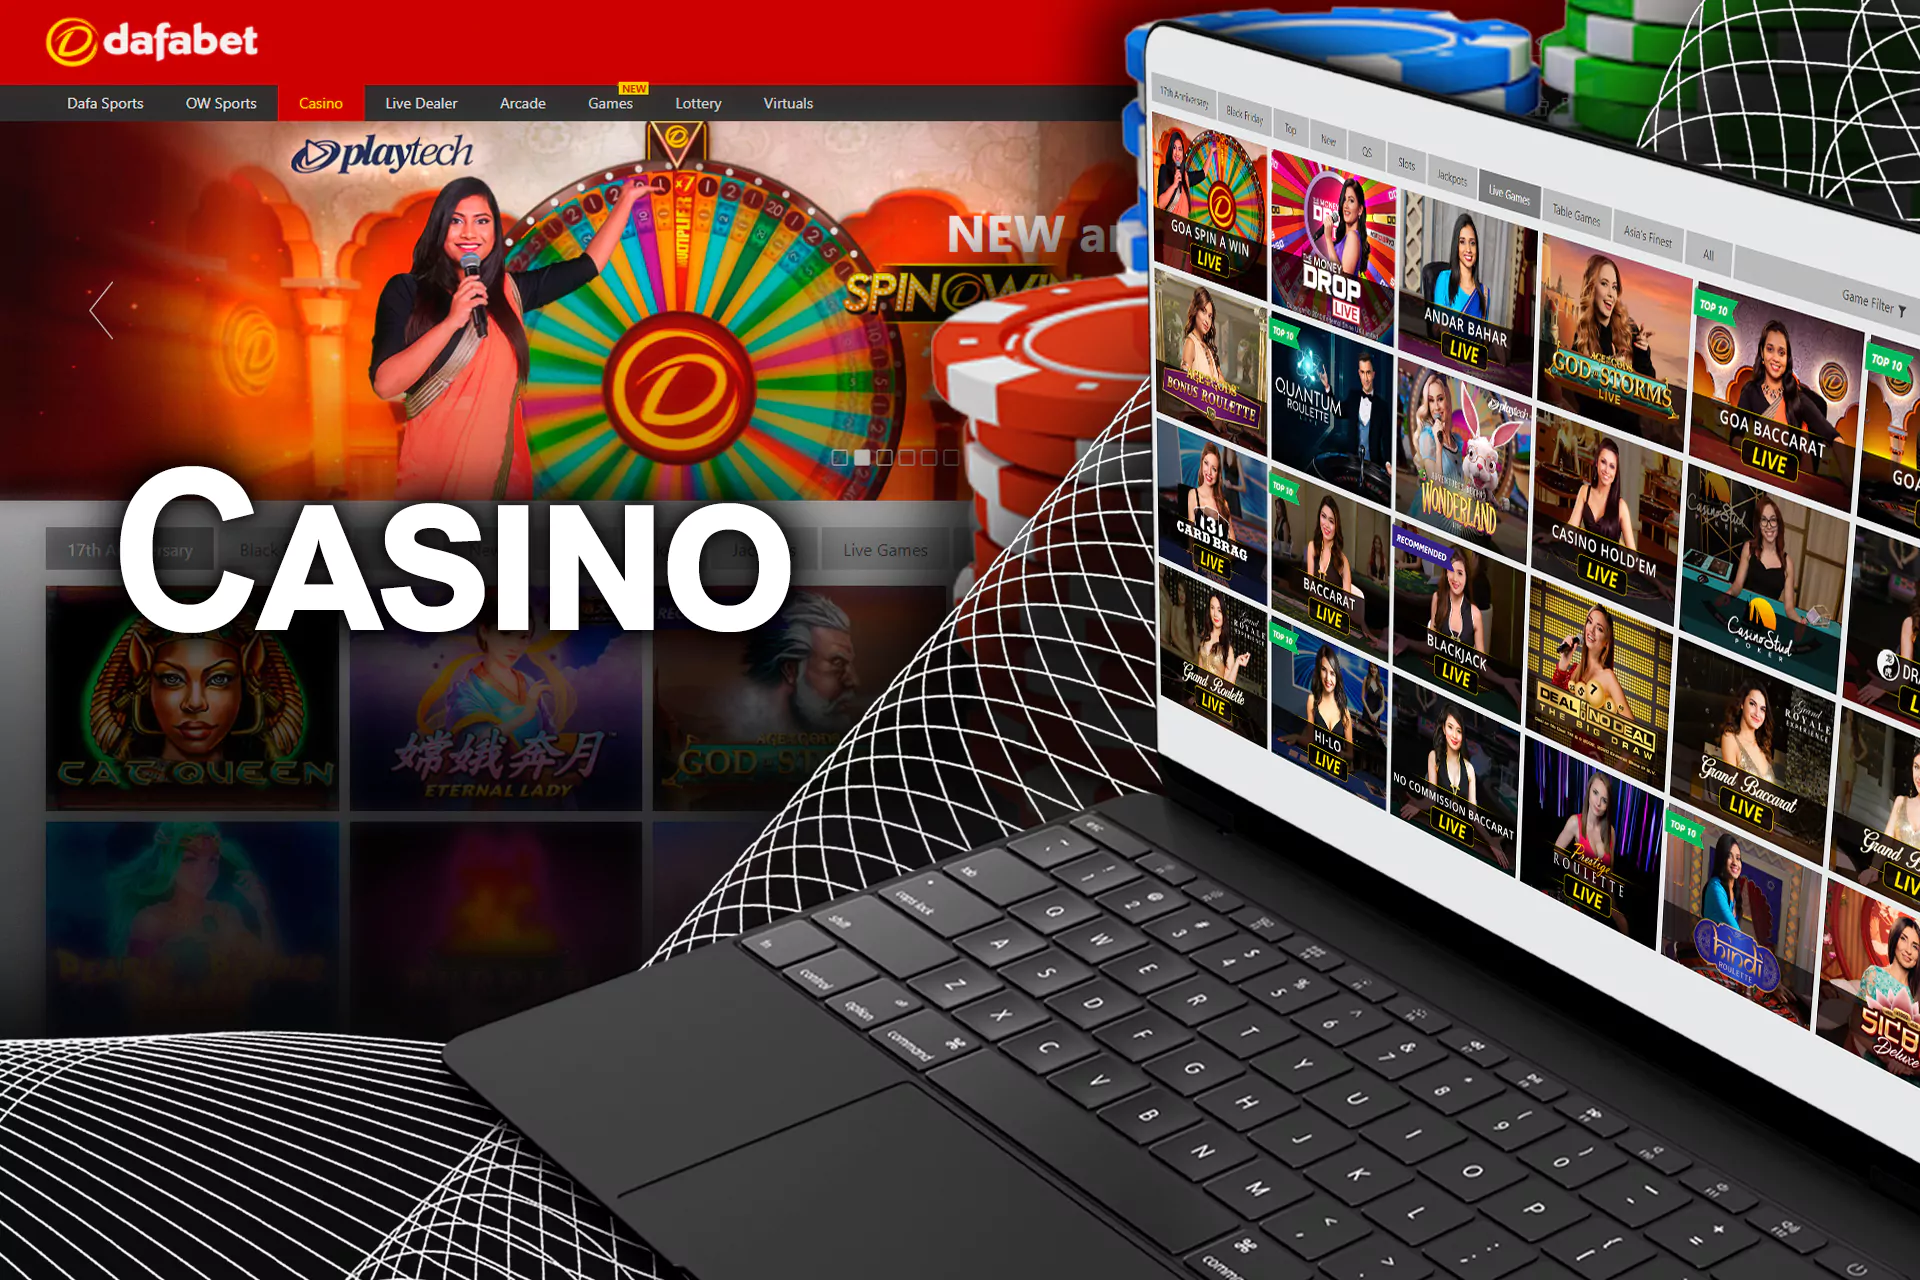 Between matches, you can enjoy slots and table games in the Dafabet casino.